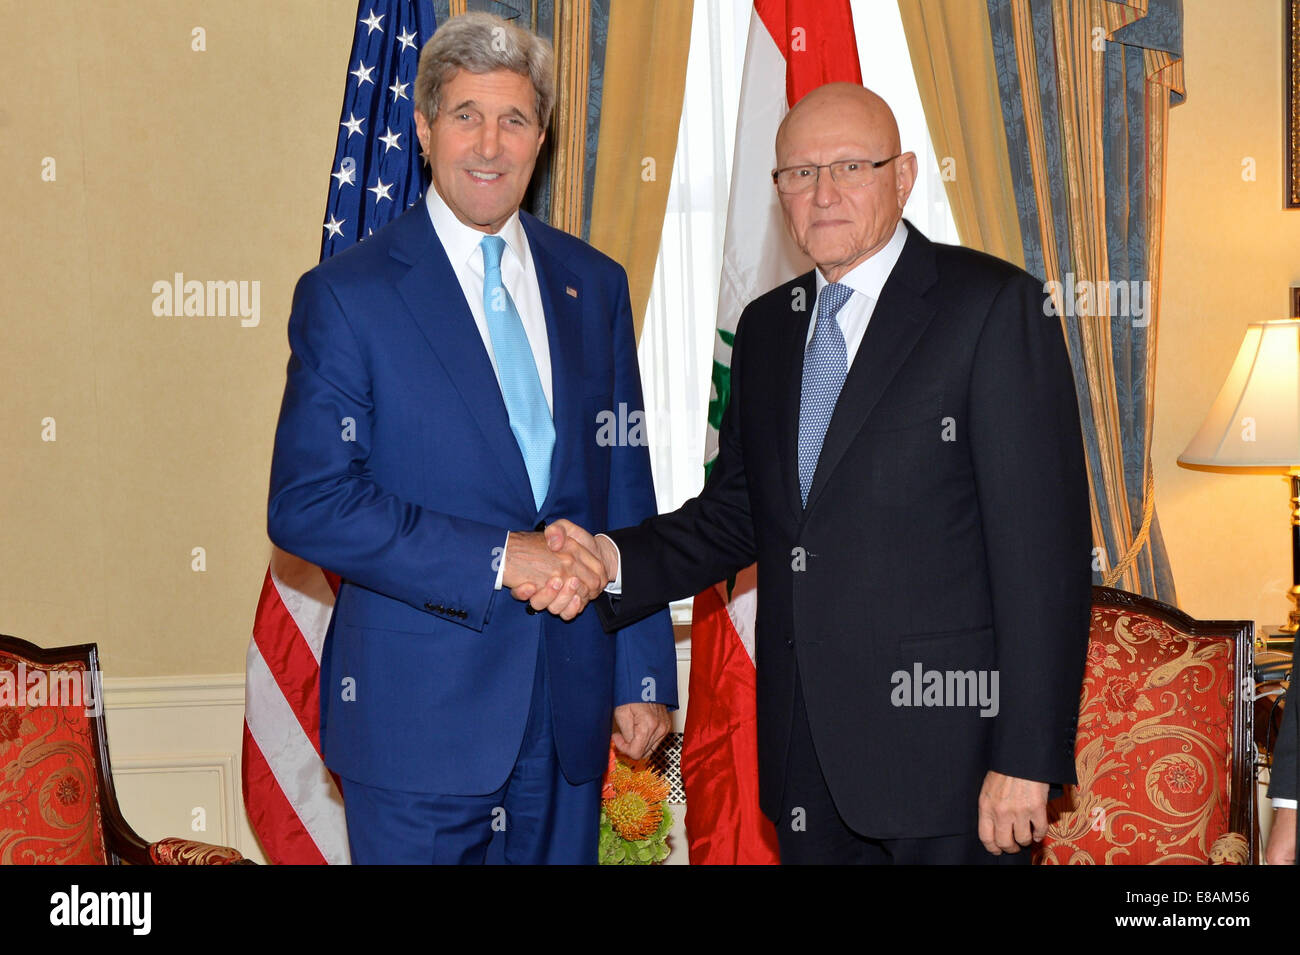 U.S. Secretary of State John Kerry greets Lebanese Prime Minister Tammam Salam before their bilateral meeting on the margins of Stock Photo